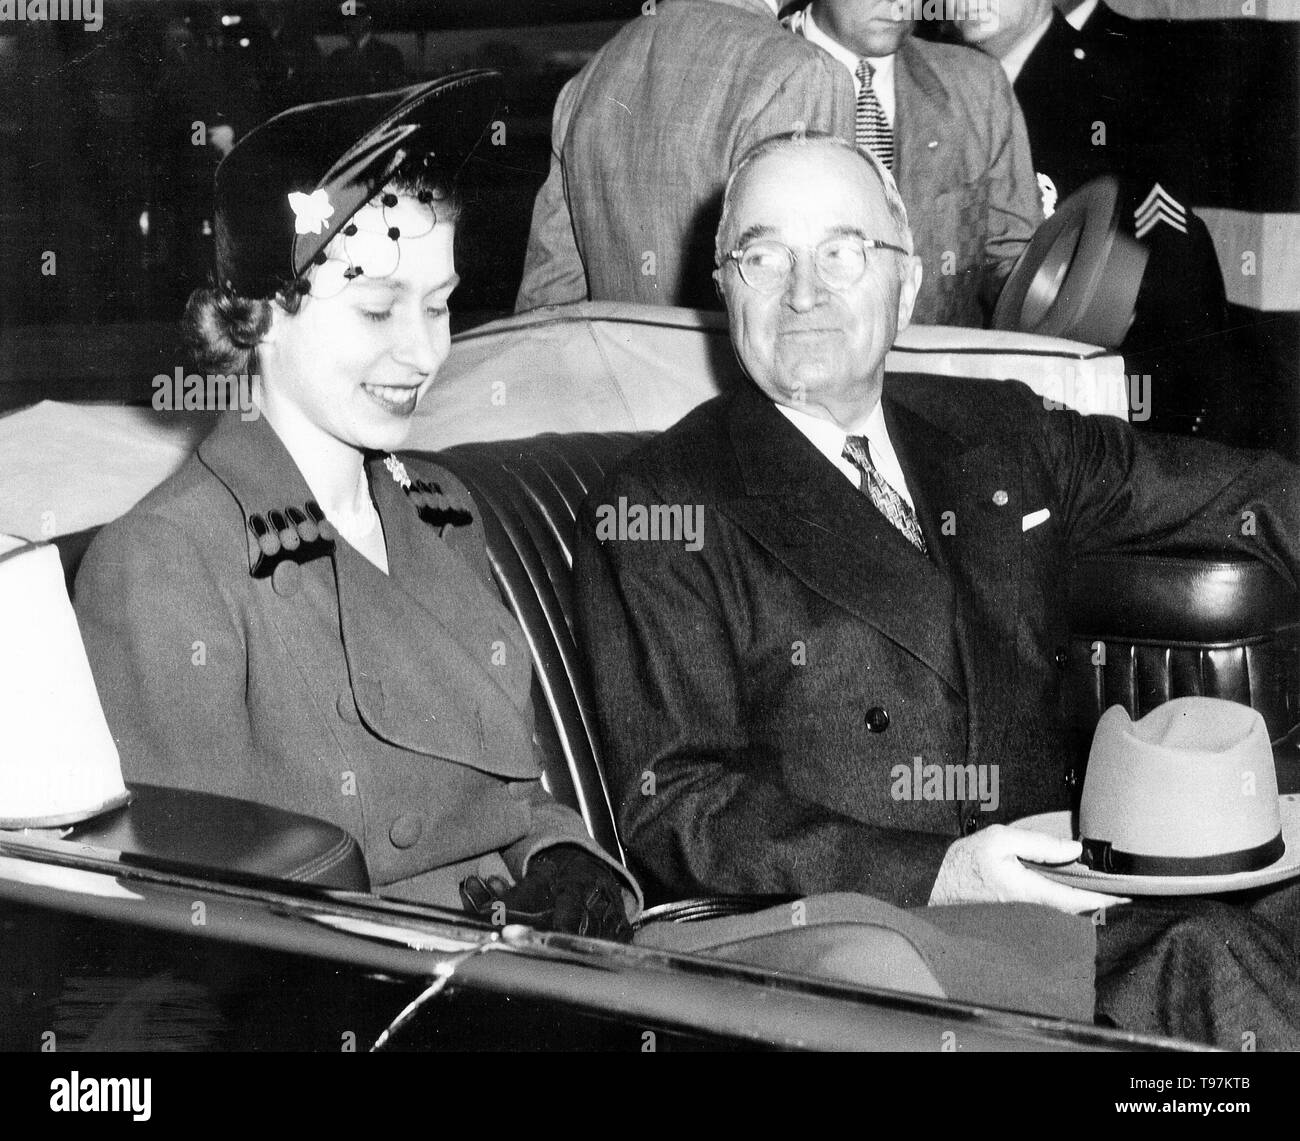 Photograph of President Harry S. Truman and England's Princess Elizabeth in Limousine, 10/31/1951 Stock Photo